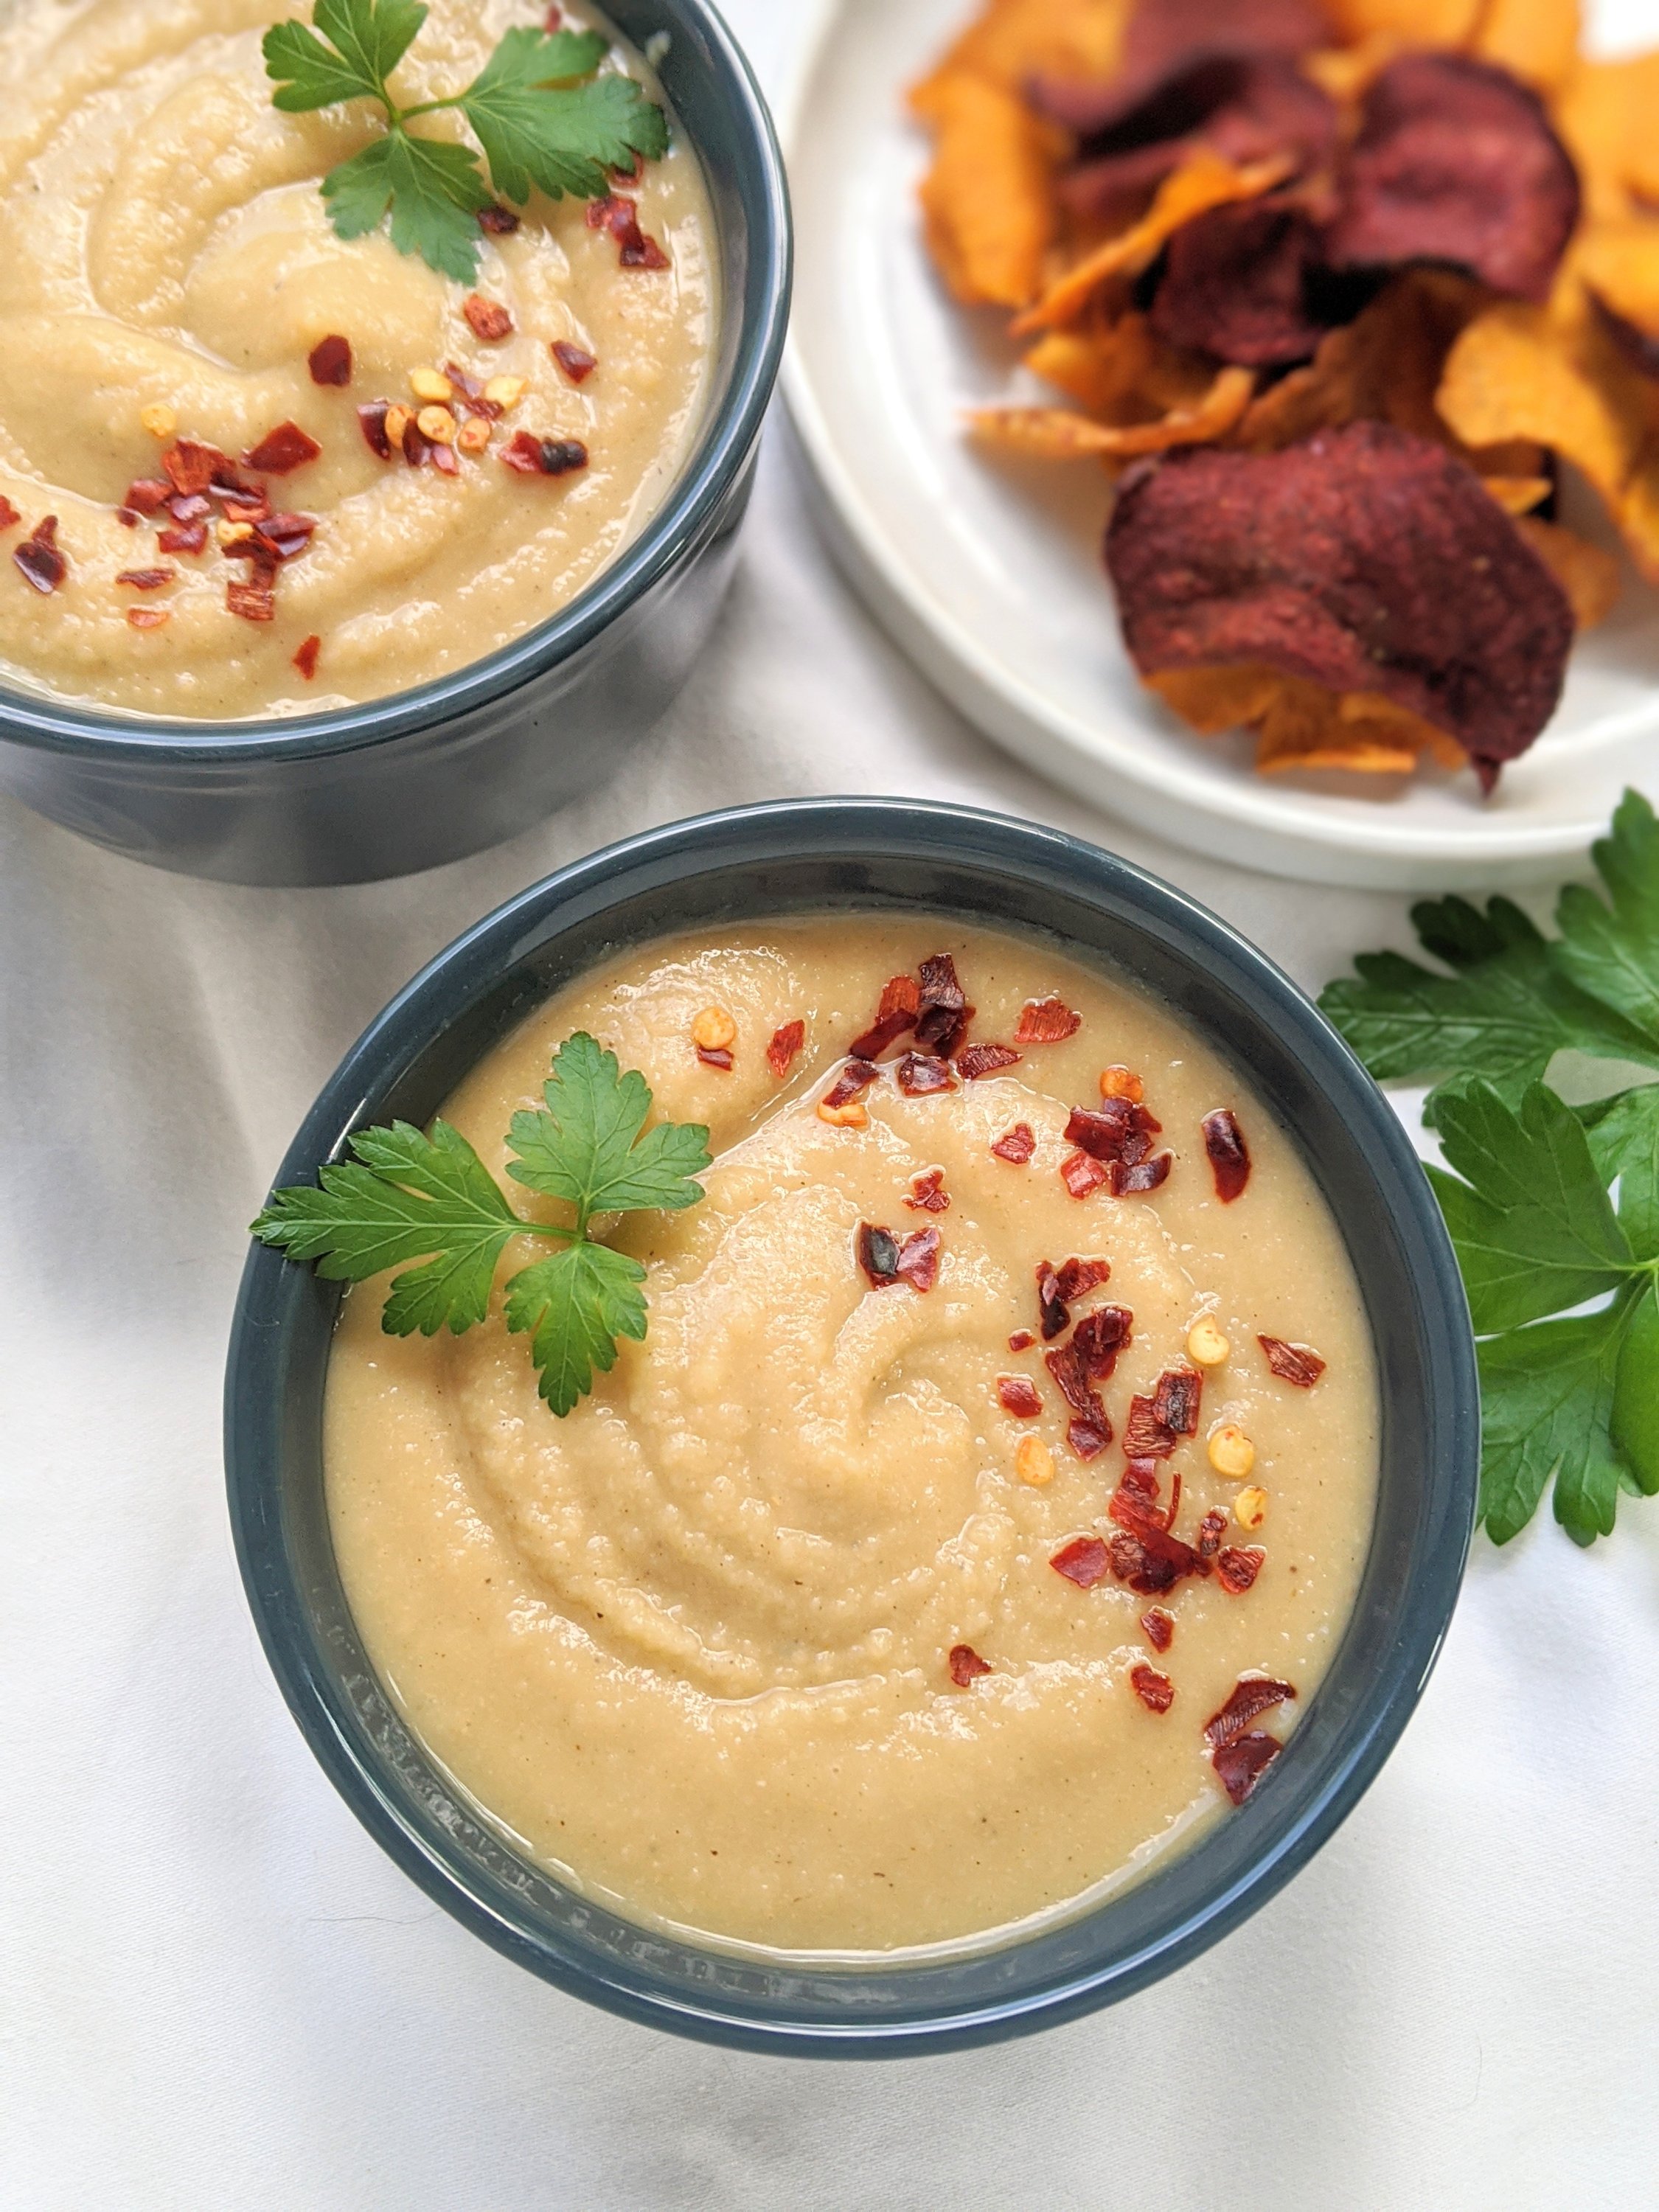 tahini free hummus pressure cooker recipes with vegetable chips and parsley for garnish